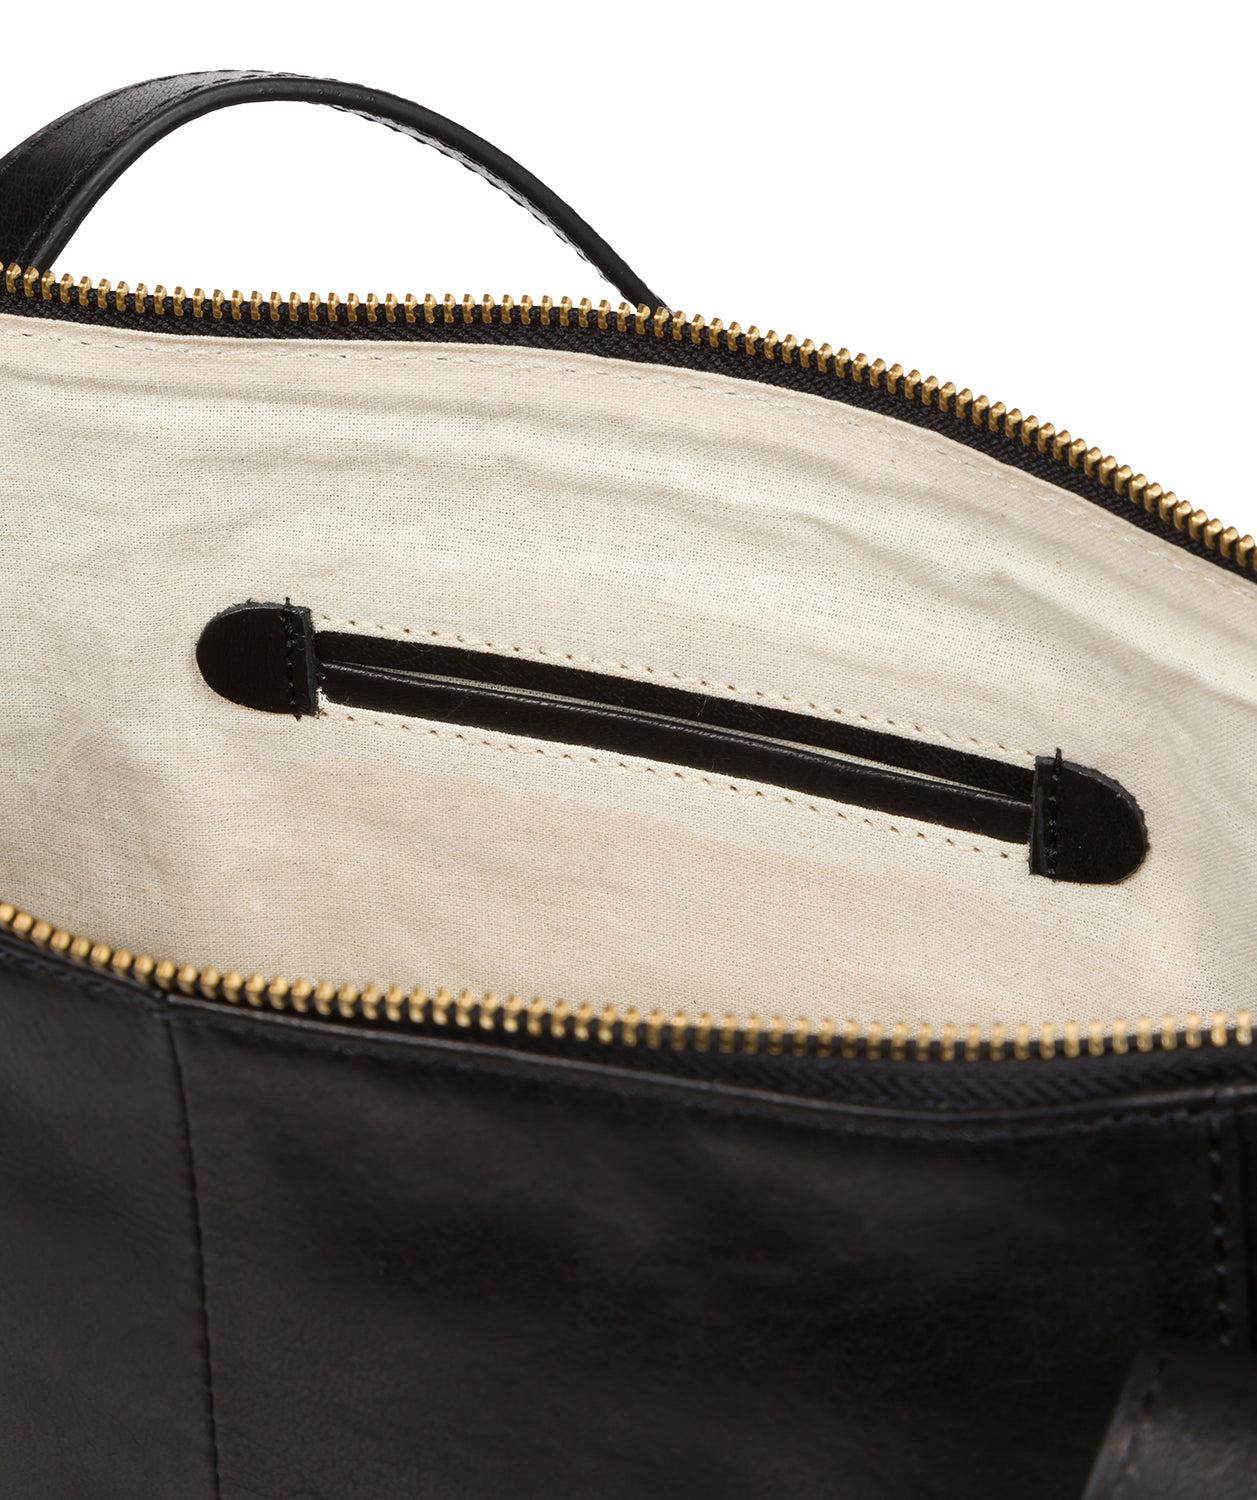 Black Leather Tote Bag 'Mondo' by Conkca London – Pure Luxuries London